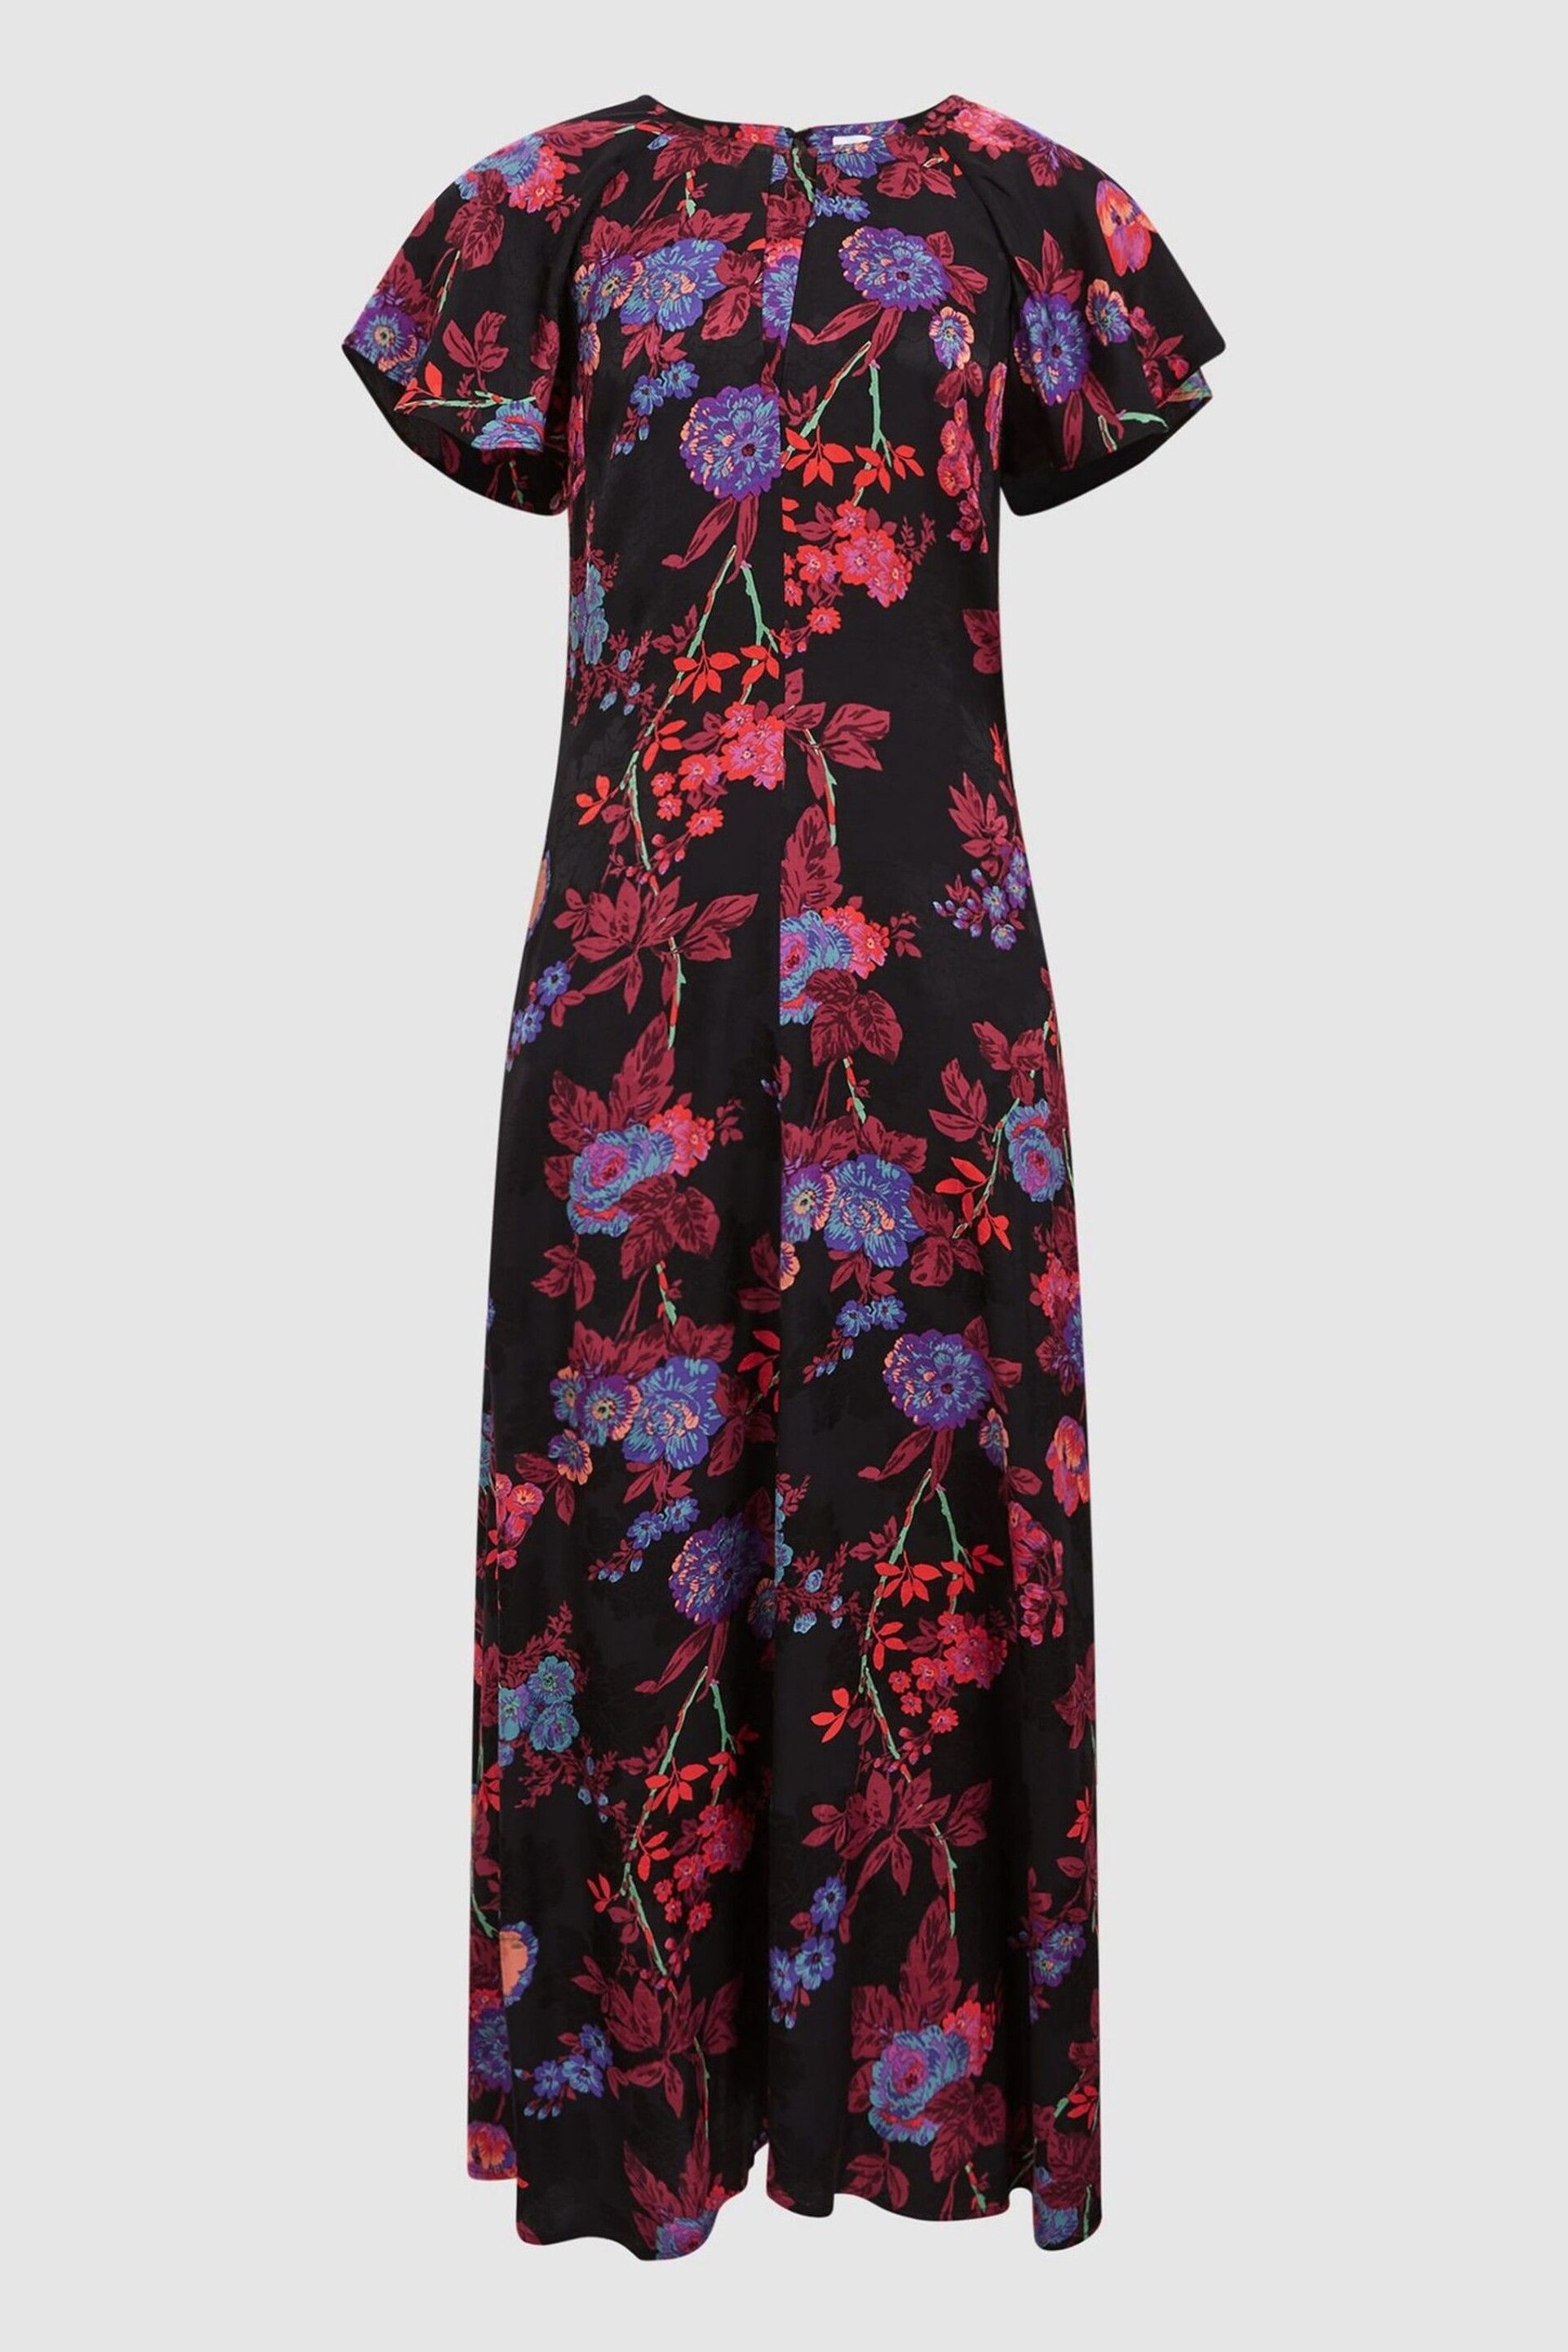 Reiss Black/Pink Leni Fitted Floral Print Midi Dress - Image 2 of 7